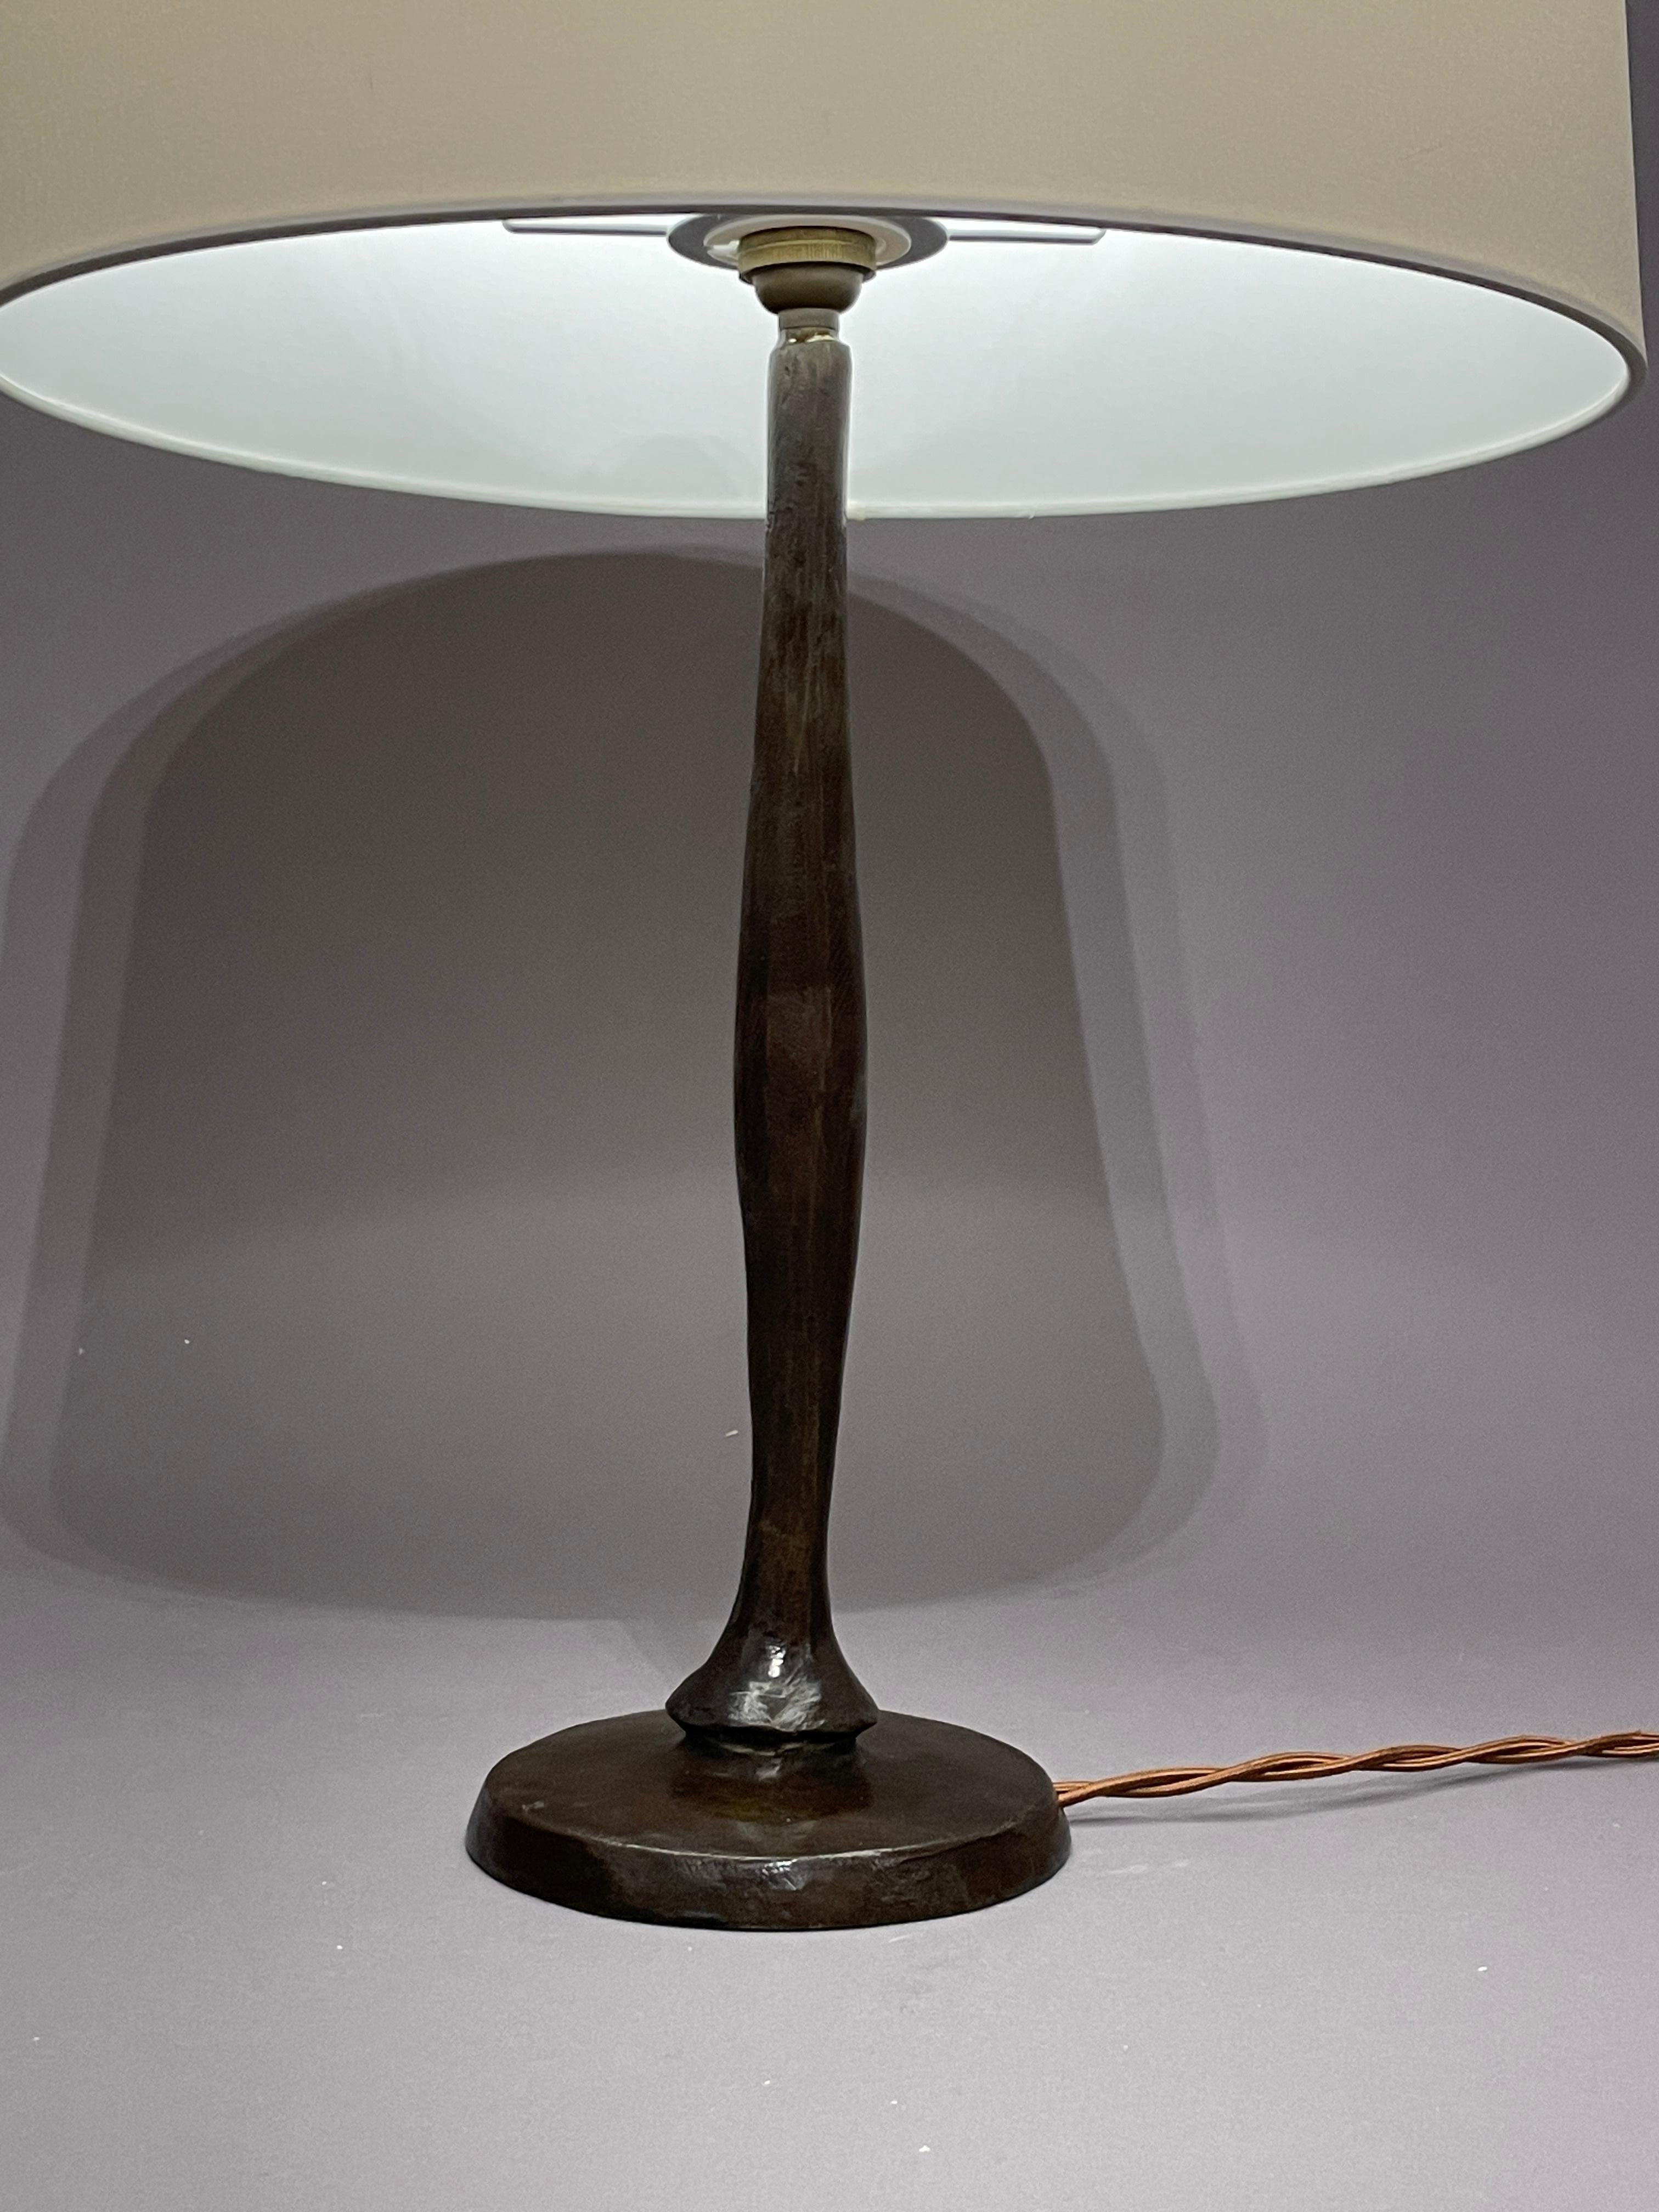 European Augustin Granet Table Lamp Solid Patinated Bronze Not Giacometti But, See Video For Sale